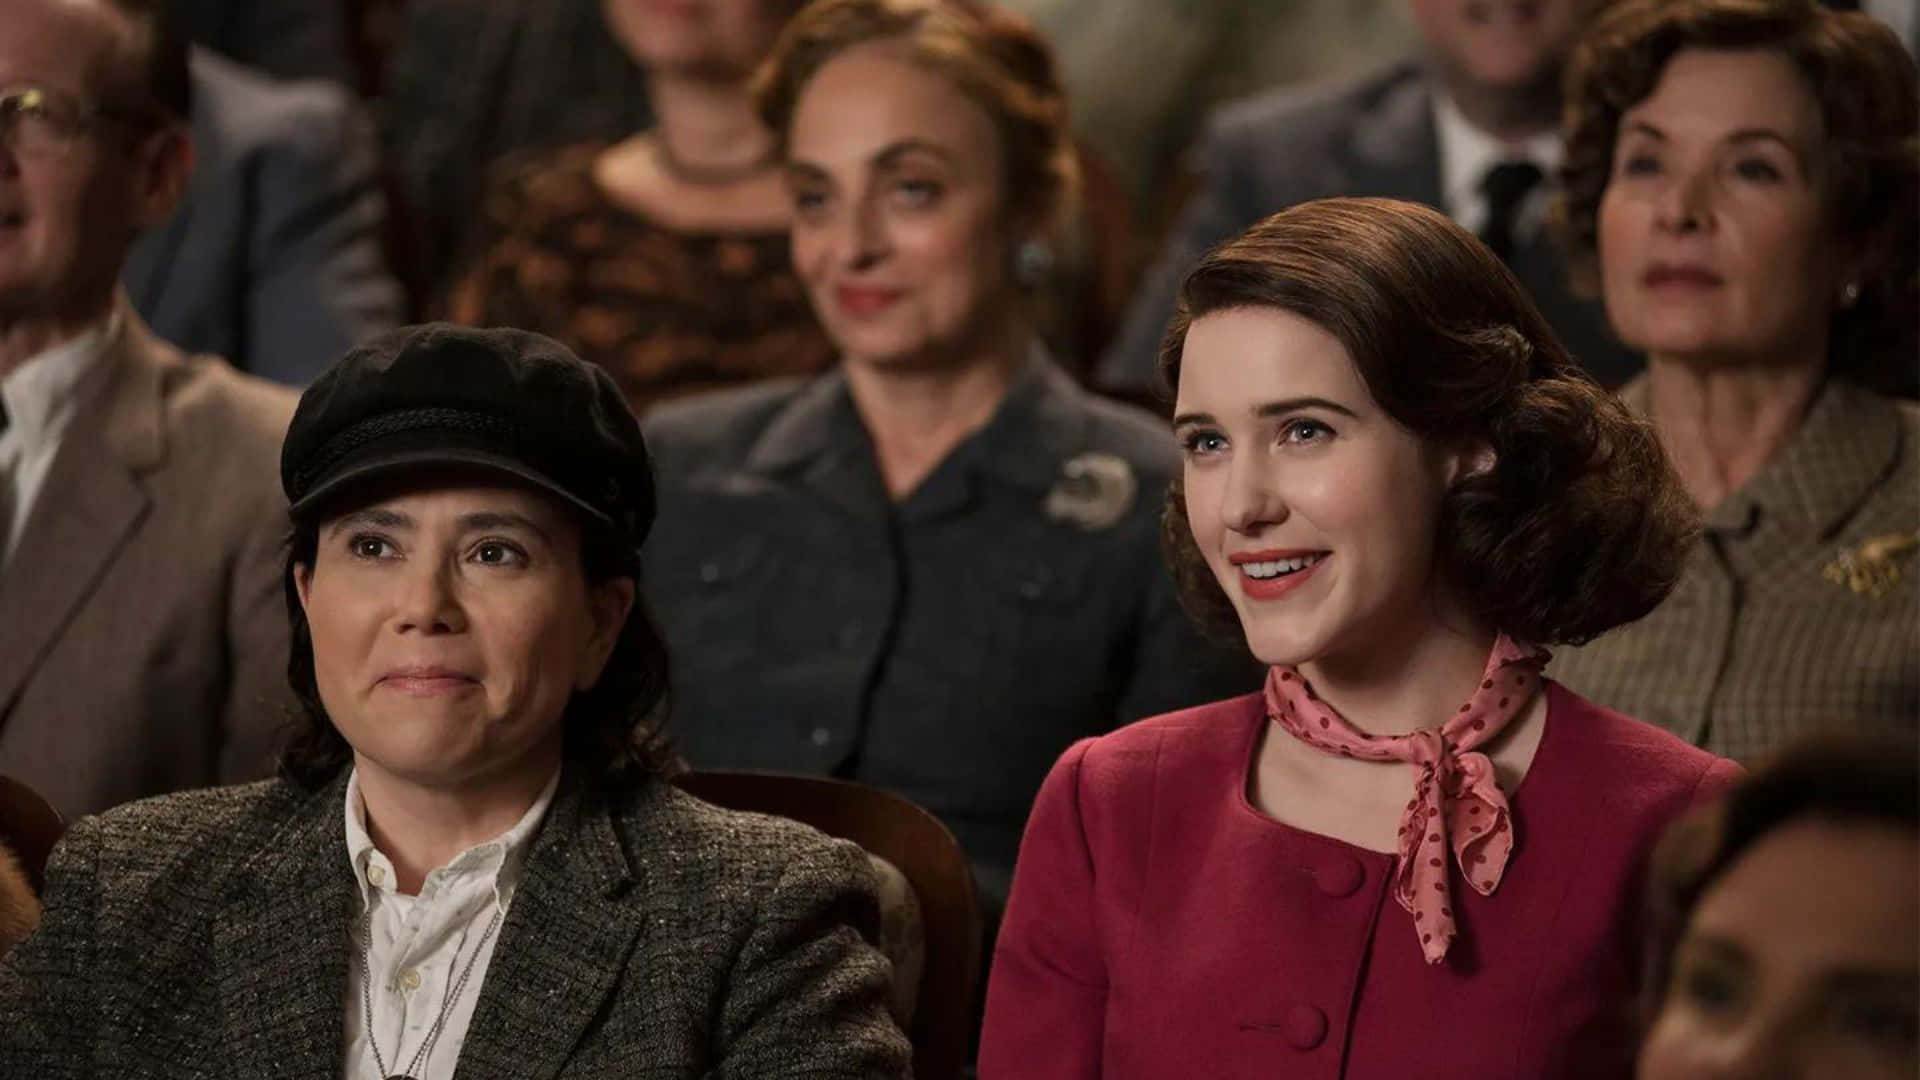 Midge Maisel Performing Onstage In The Marvelous Mrs. Maisel Wallpaper